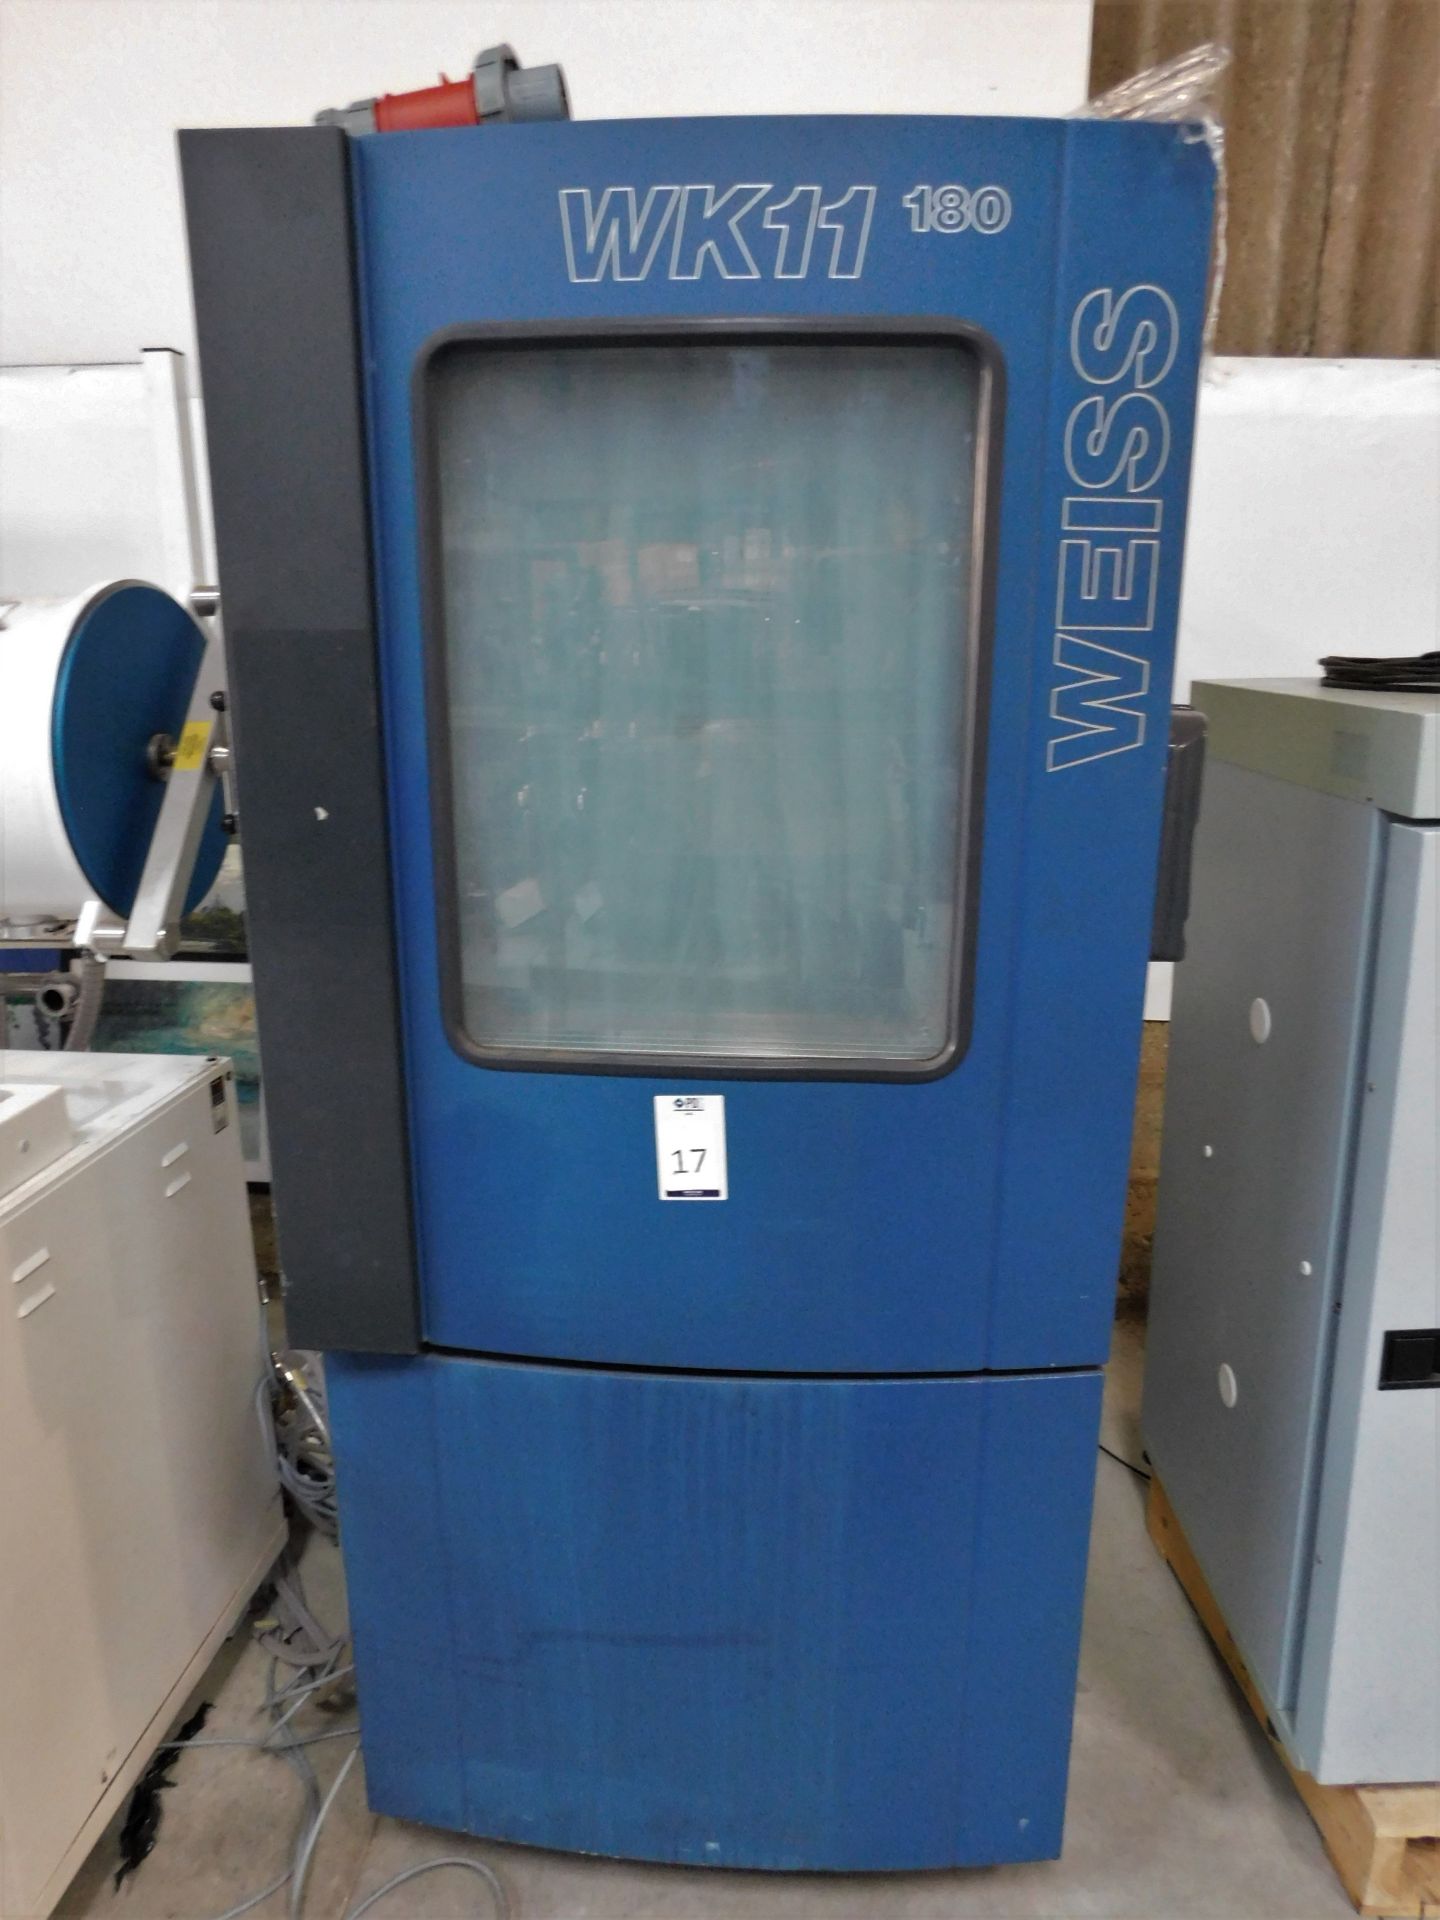 Weiss WK11 180 Environmental Test Chamber (2003), Serial number 58226037750010, Weiss WK11 – 180/40 - Image 3 of 13